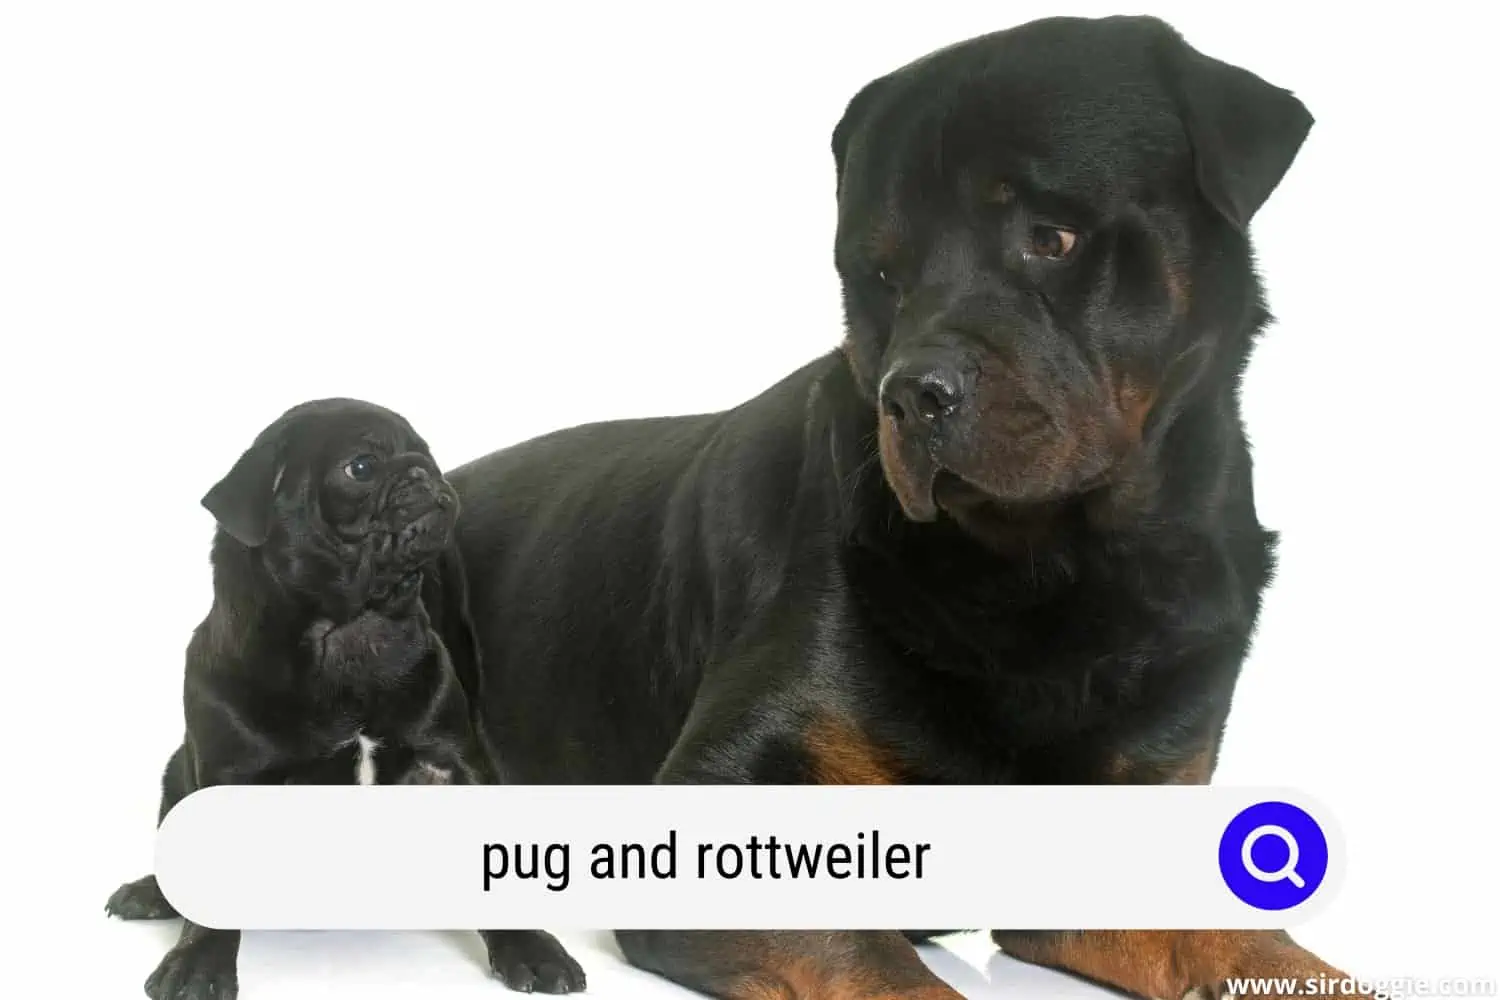 pug and rottweiler